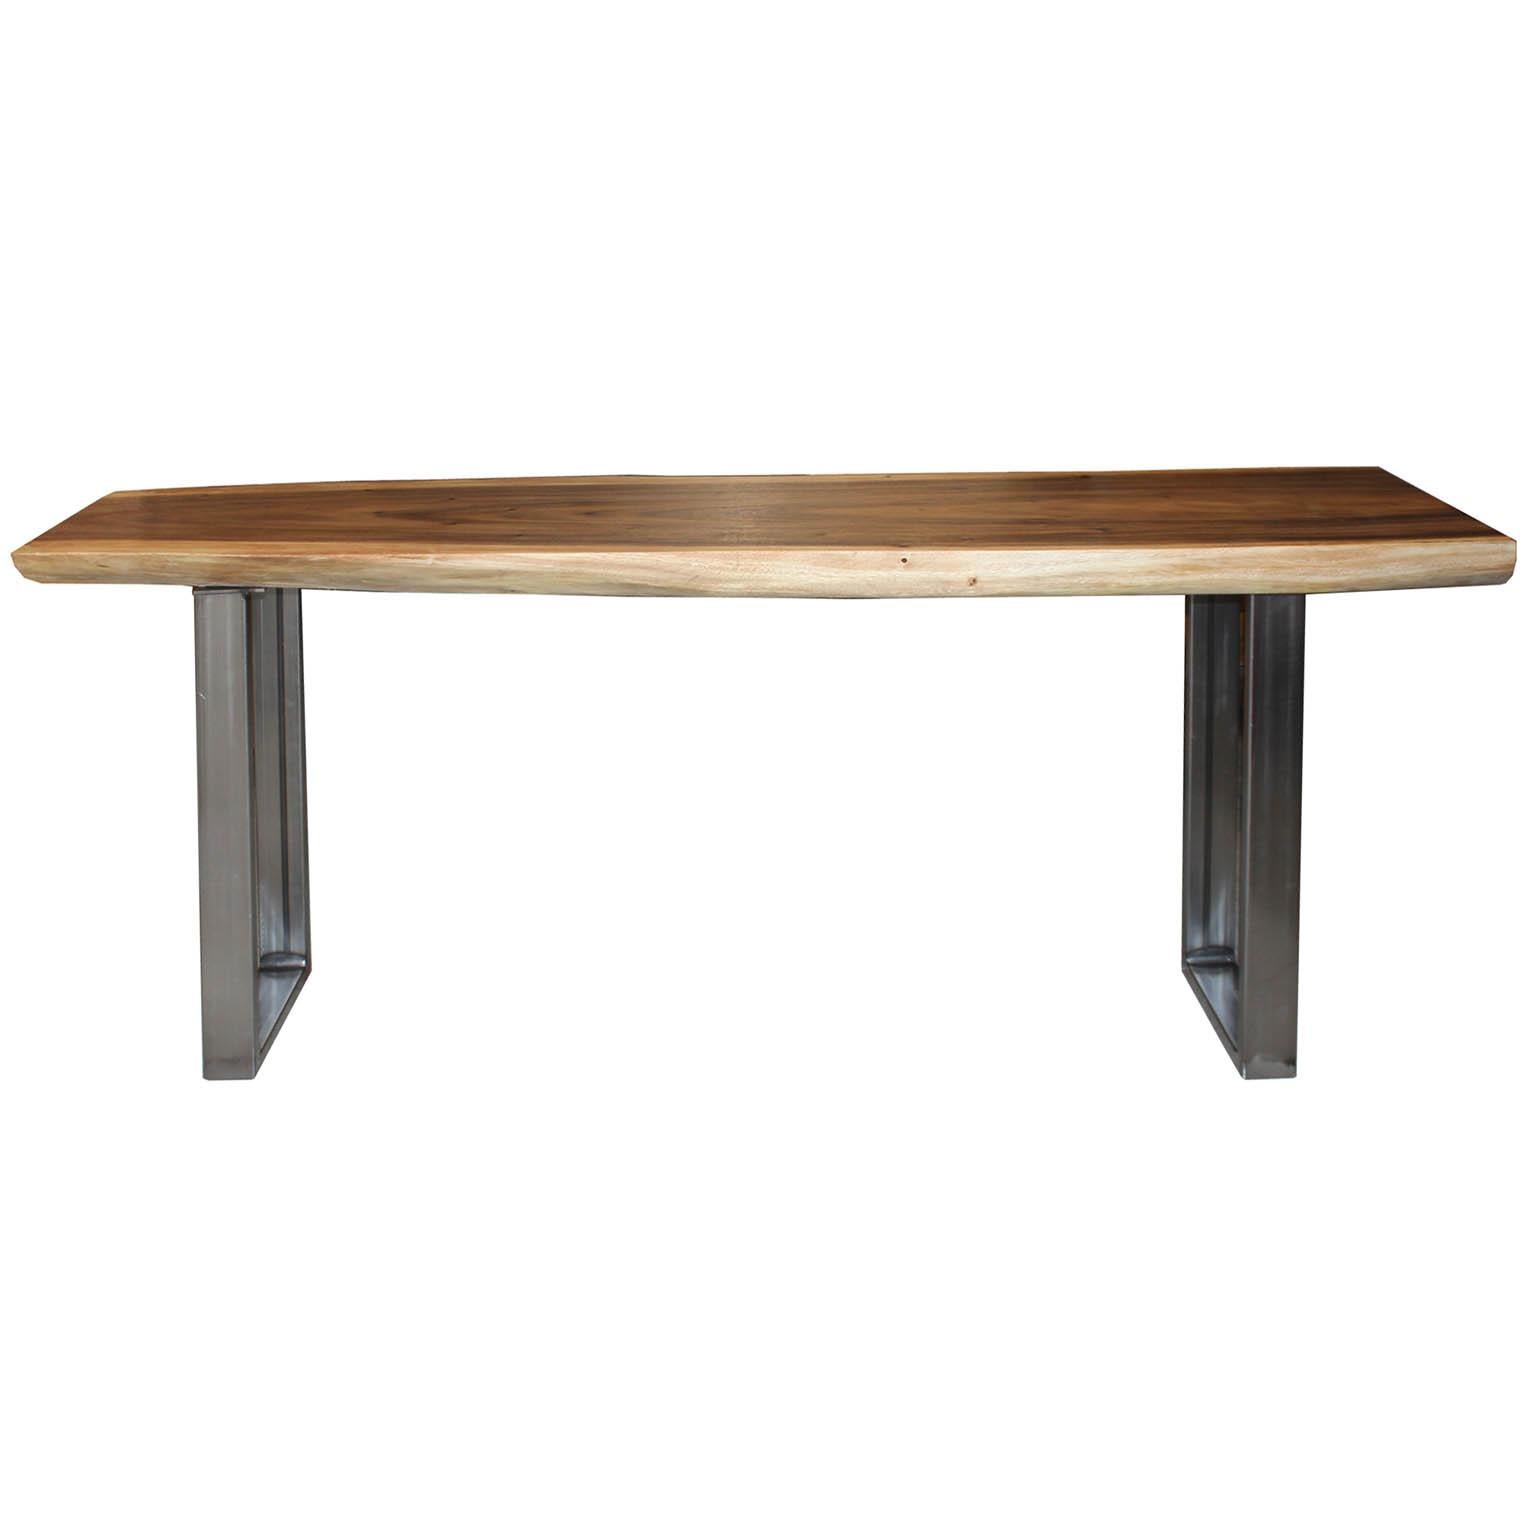 Live edge acacia wood console table on metal legs. This piece was made in Indonesia.